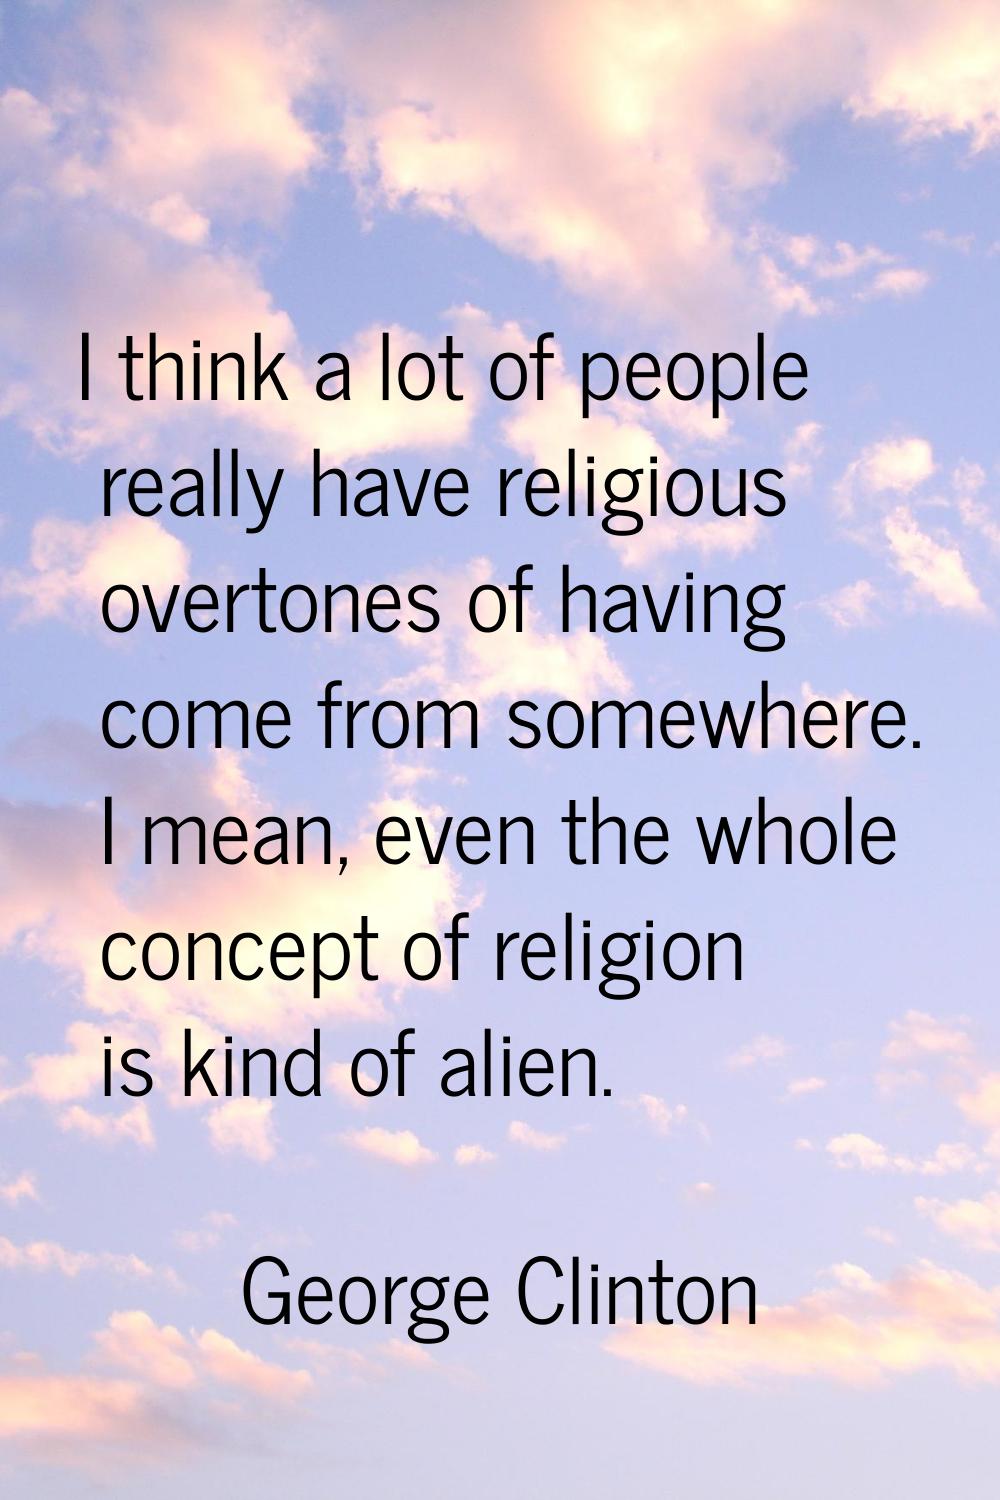 I think a lot of people really have religious overtones of having come from somewhere. I mean, even